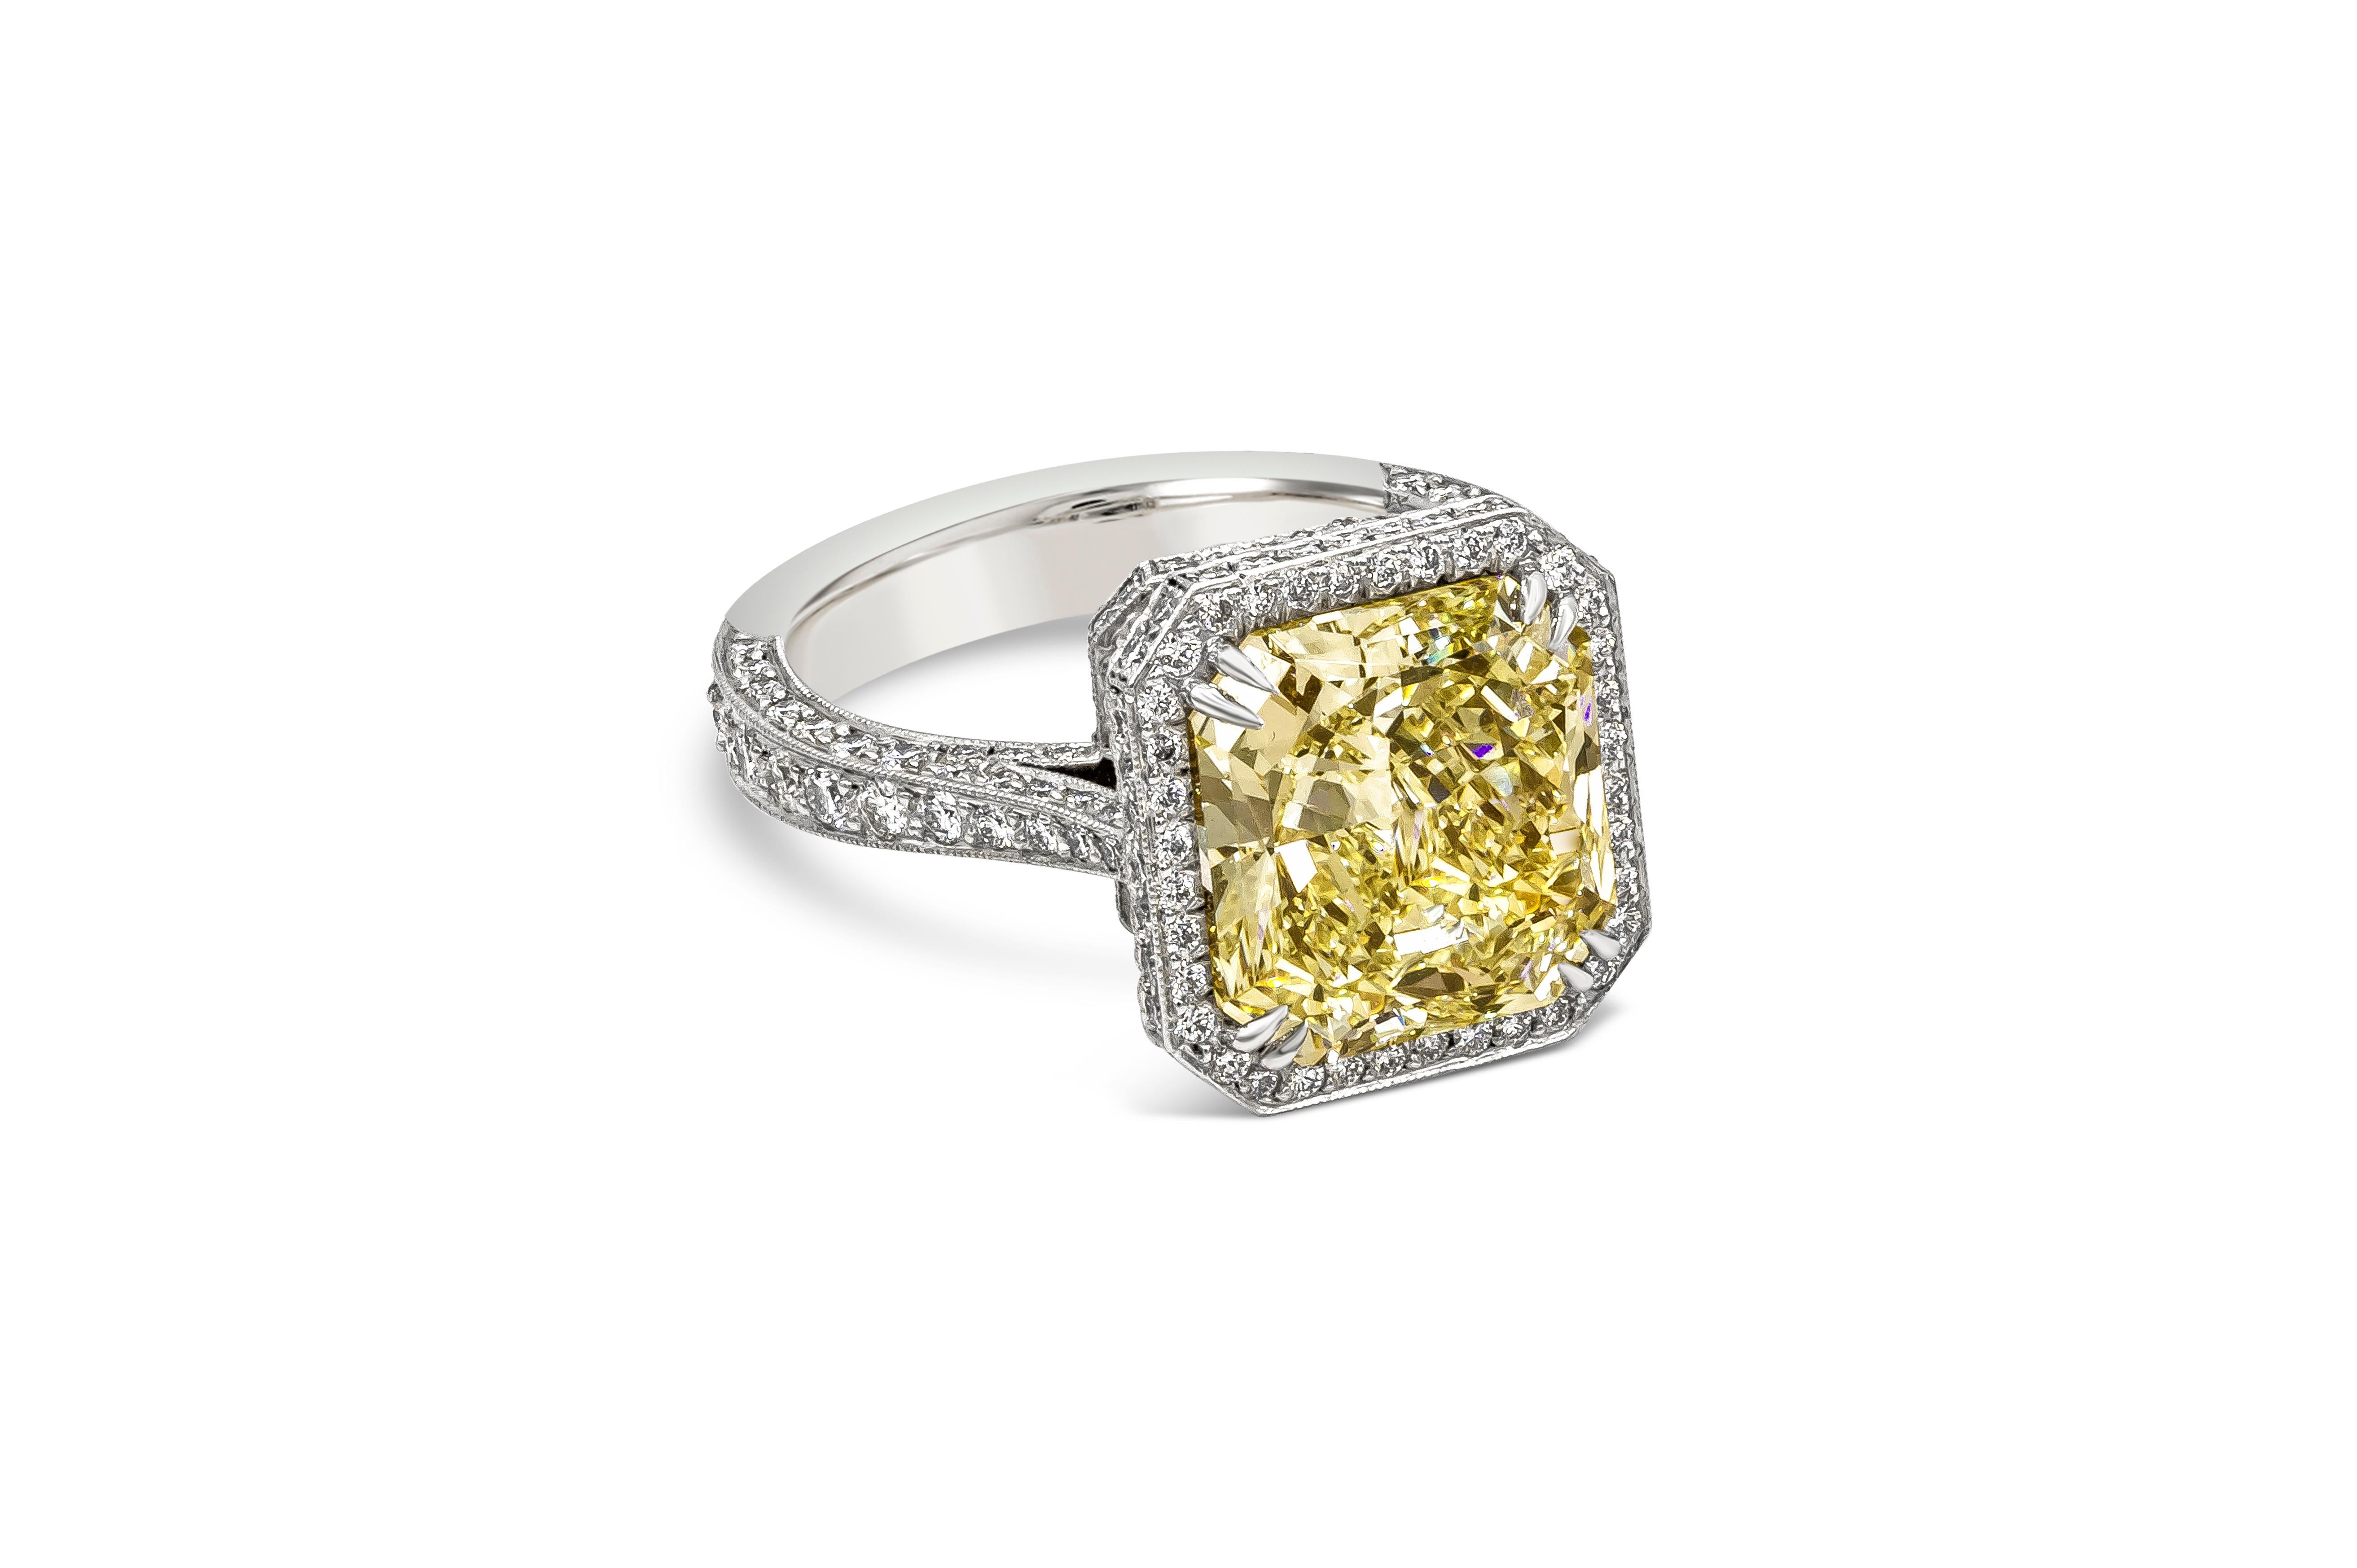 A vintage-looking engagement ring style showcasing a 5.27 carat radiant cut yellow diamond, certified by GIA as Fancy Light Yellow color, VS1 in clarity. Surrounding the center diamond is a brilliant diamond halo in eight prong setting. Shank is